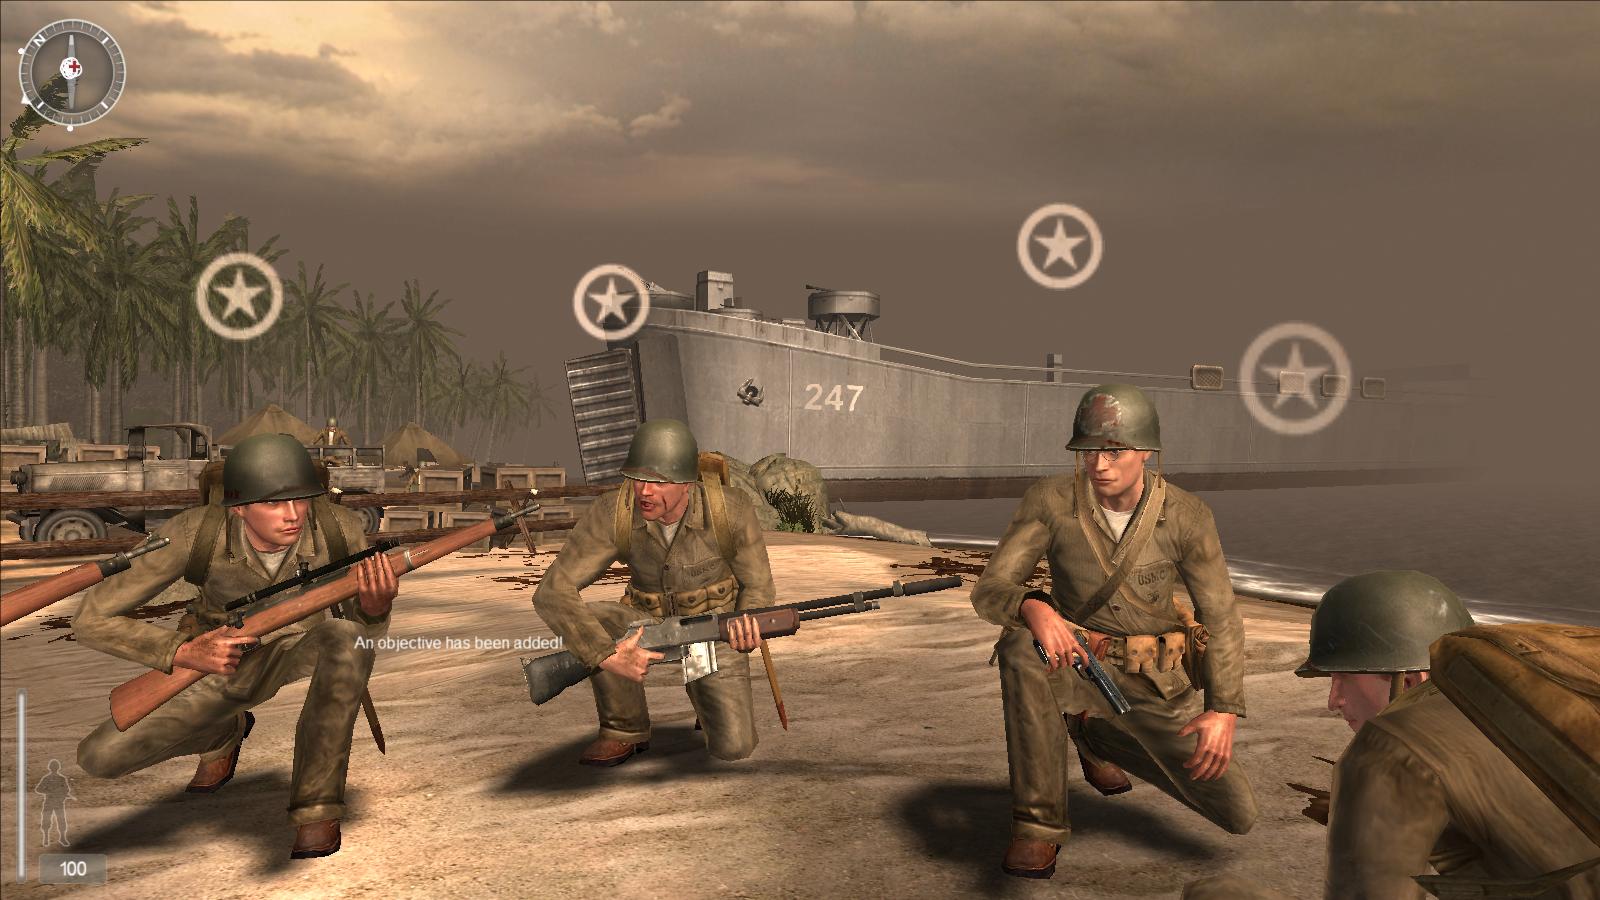 medal of honor pacific assault pc cheats